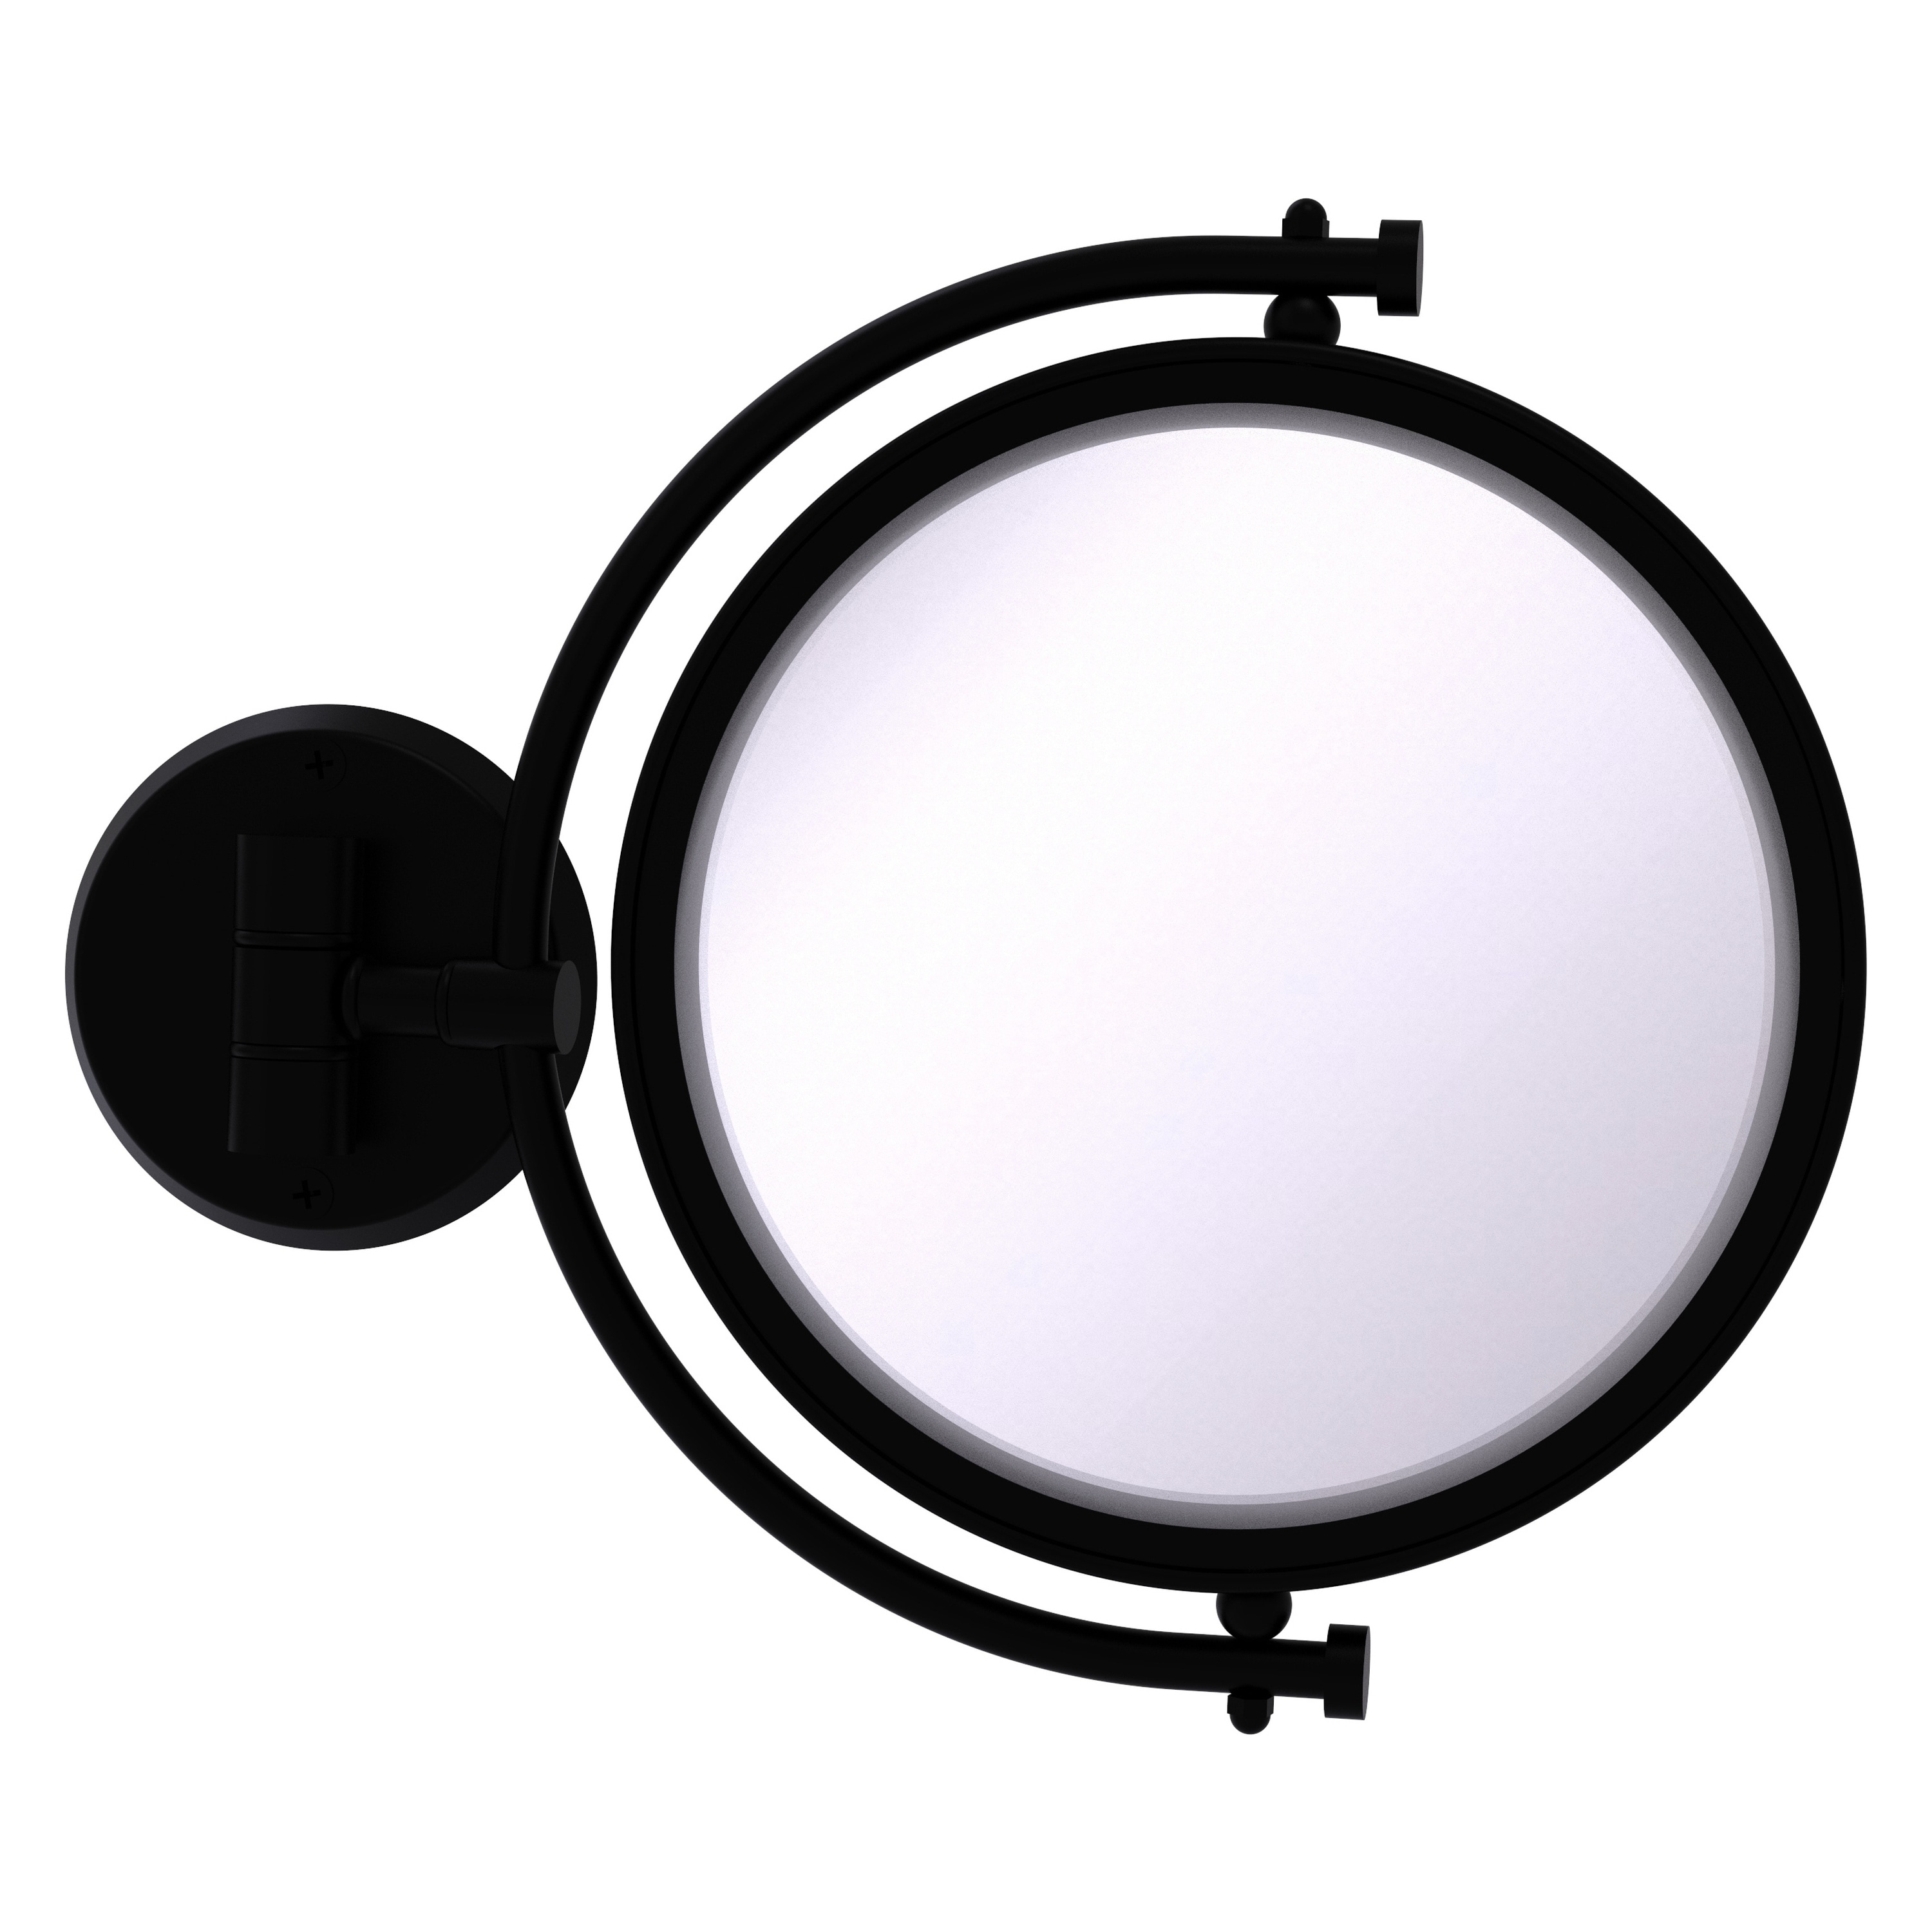 8-in x 10-in Matte Black Double-sided 3X Magnifying Wall-mounted Vanity Mirror | - Allied Brass WM-4/3X-BKM